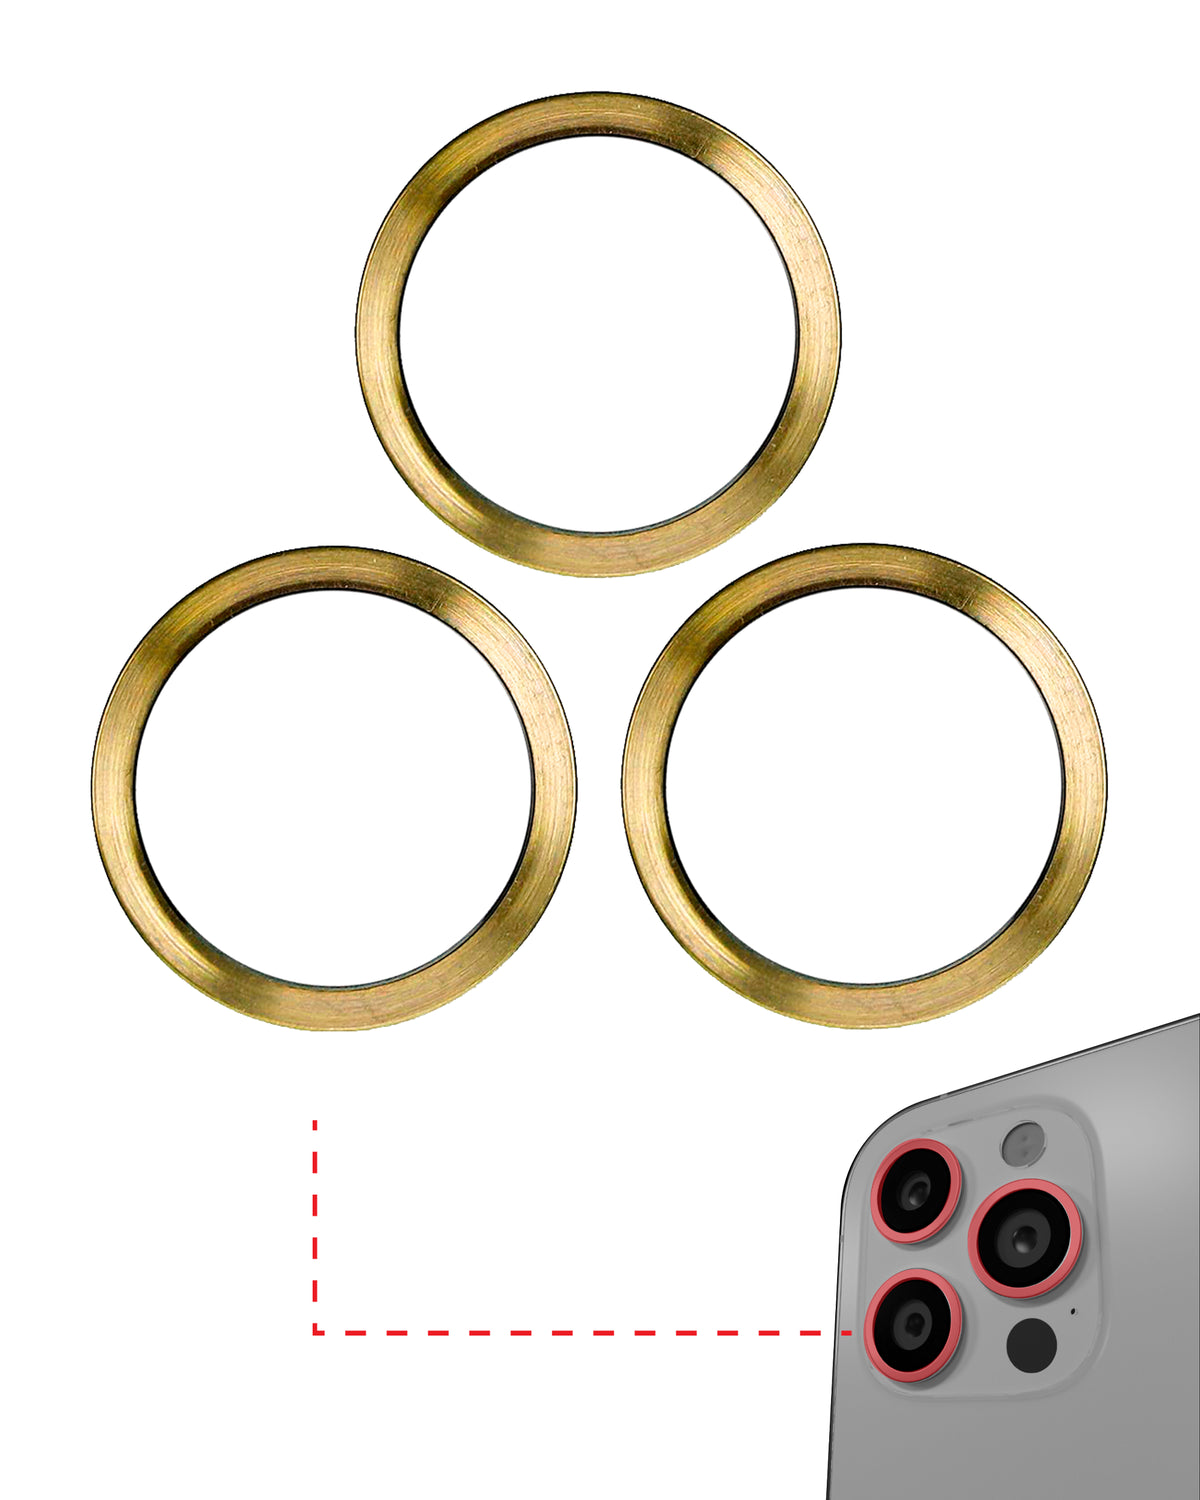 GOLD - BACK CAMERA BEZEL RING ONLY ONLY (3 PIECE SET) FOR IPHONE 11 PRO / 11 PRO MAX  (10 PACK)